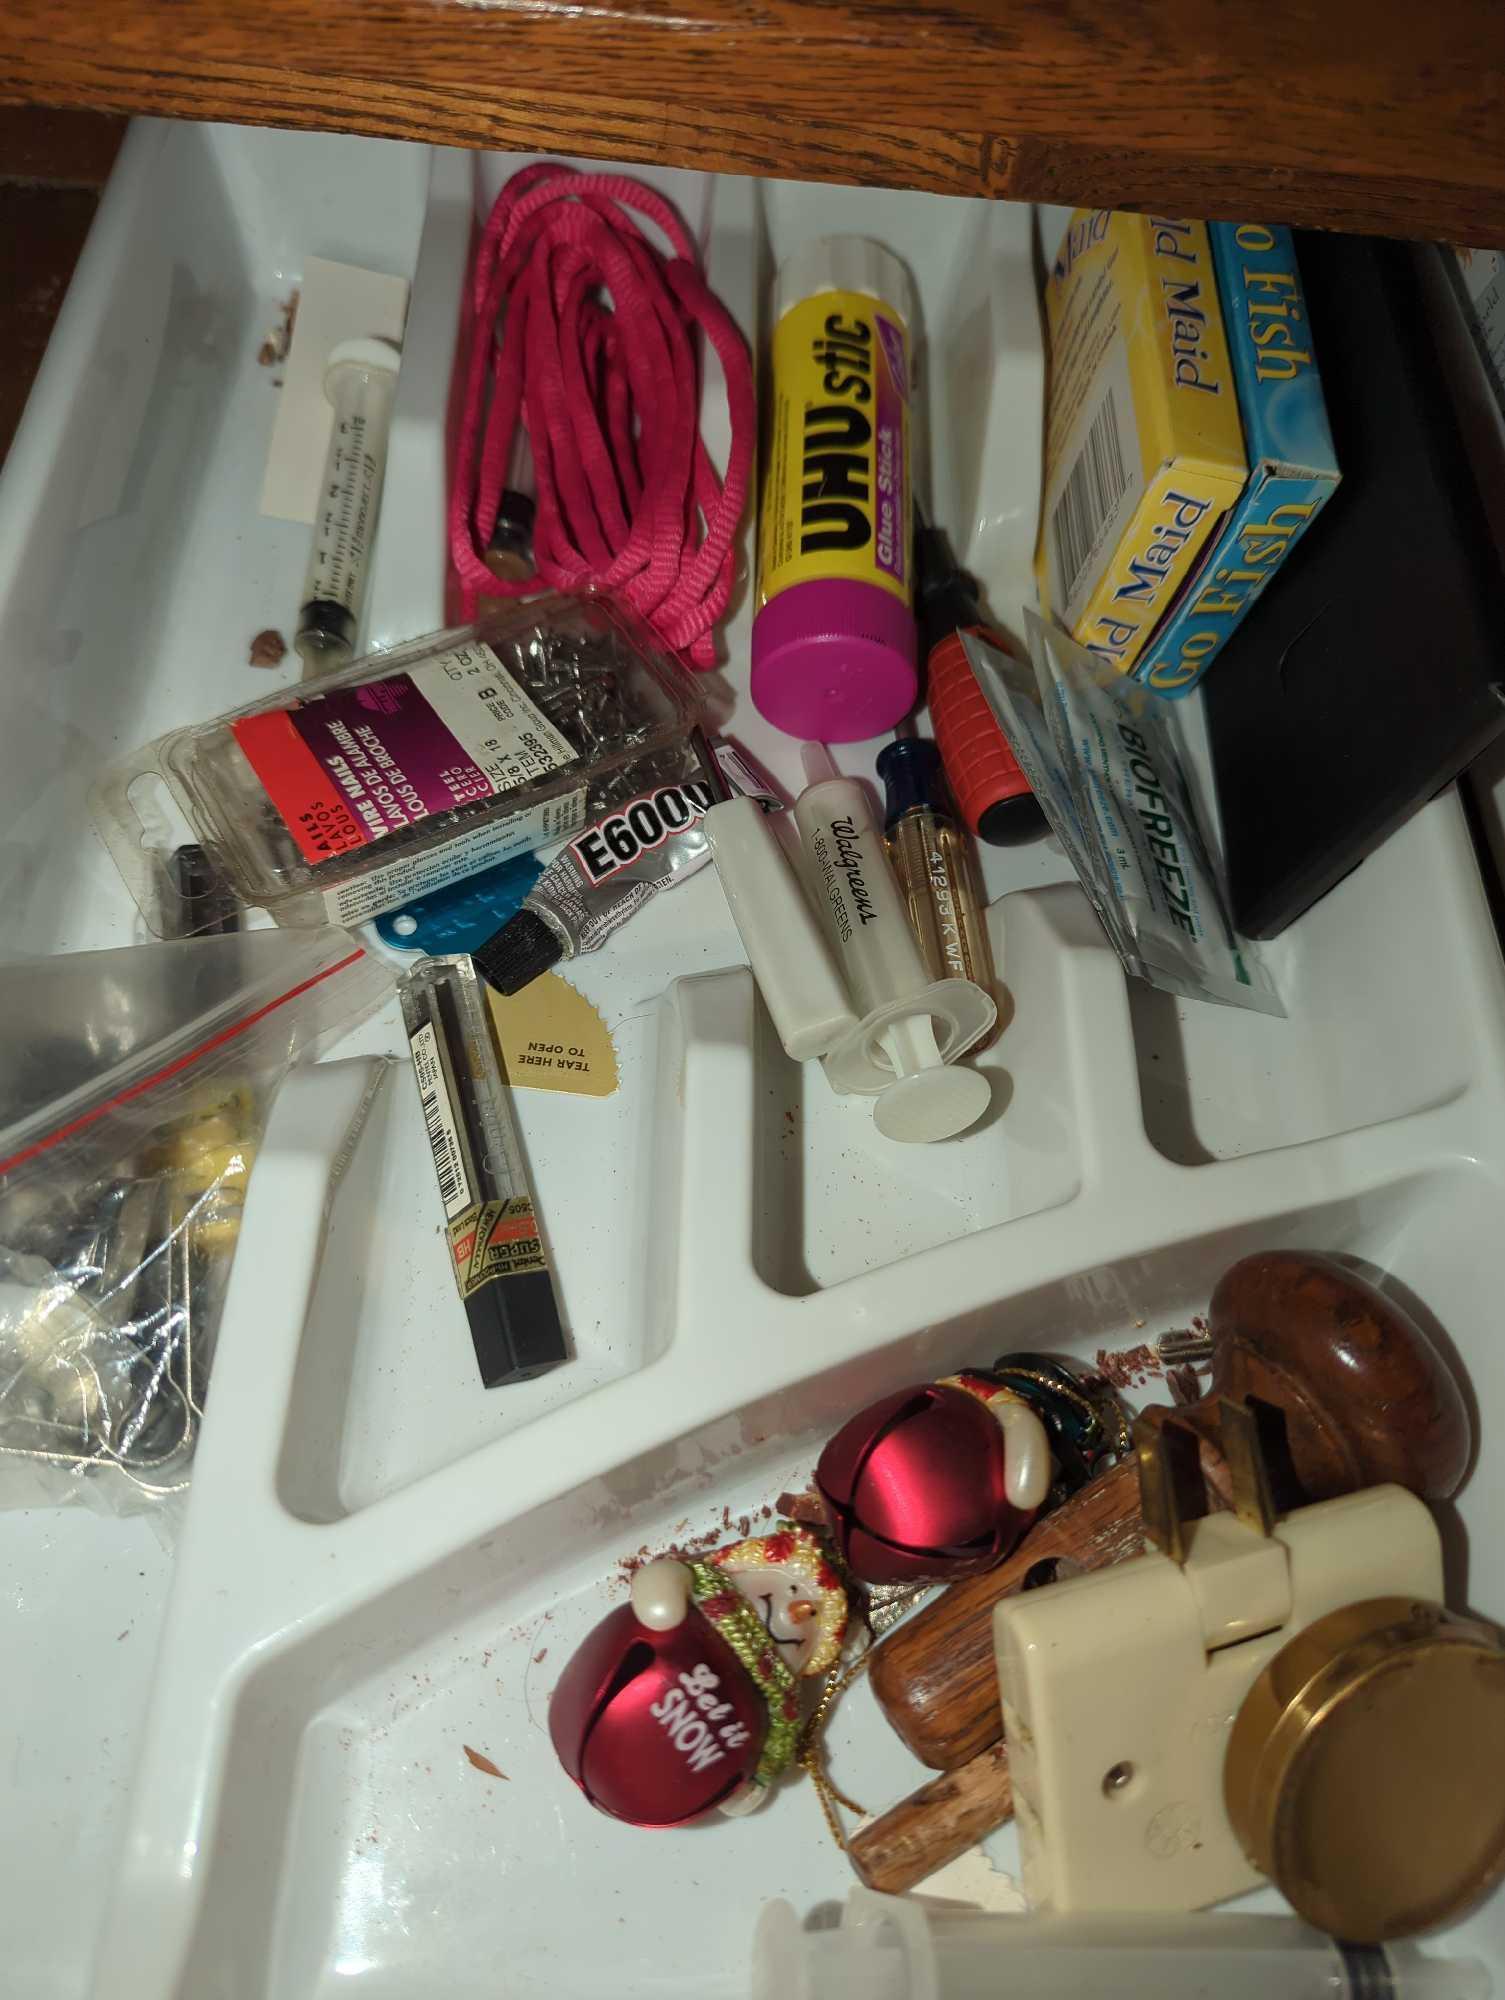 (DR) LOT OF ASSORTED ITEMS INCLUDING ART AND CRAFT ITEMS, DECORATION ITEMS, PLAYING CARDS,